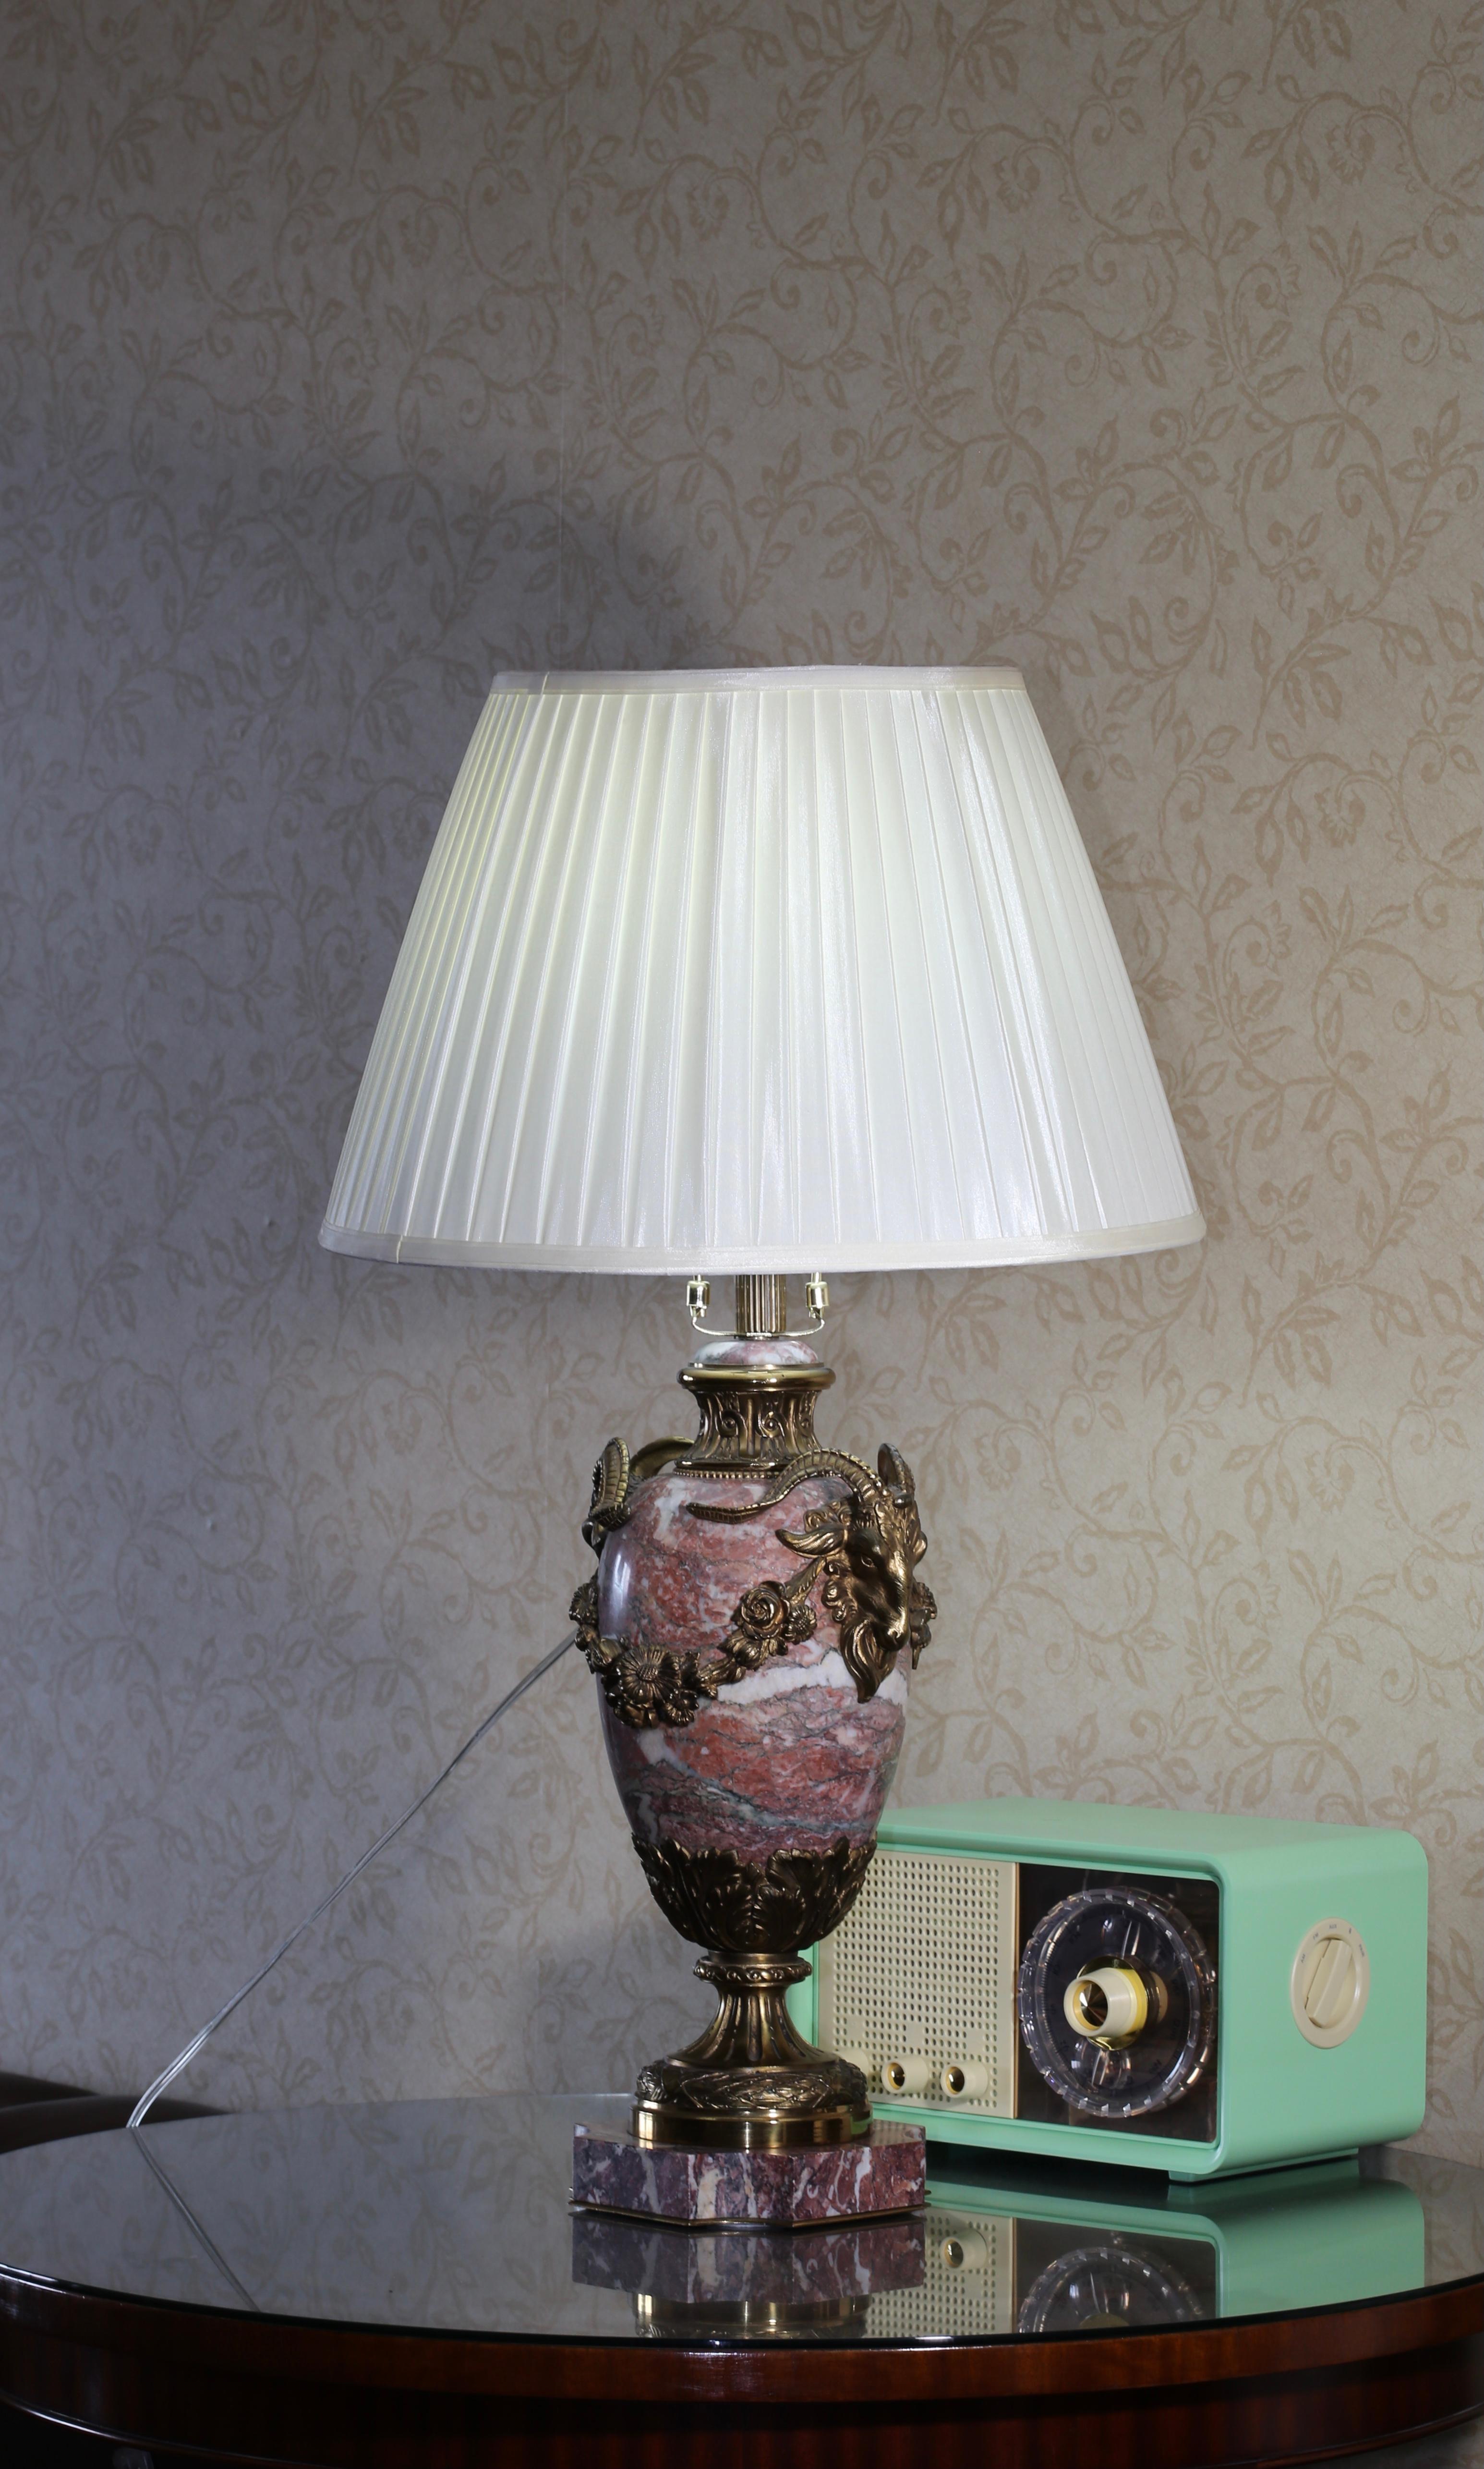 Gilt-Bronze Marble Table Lamp Early 20th Century - Christie's 2011 Auction For Sale 3